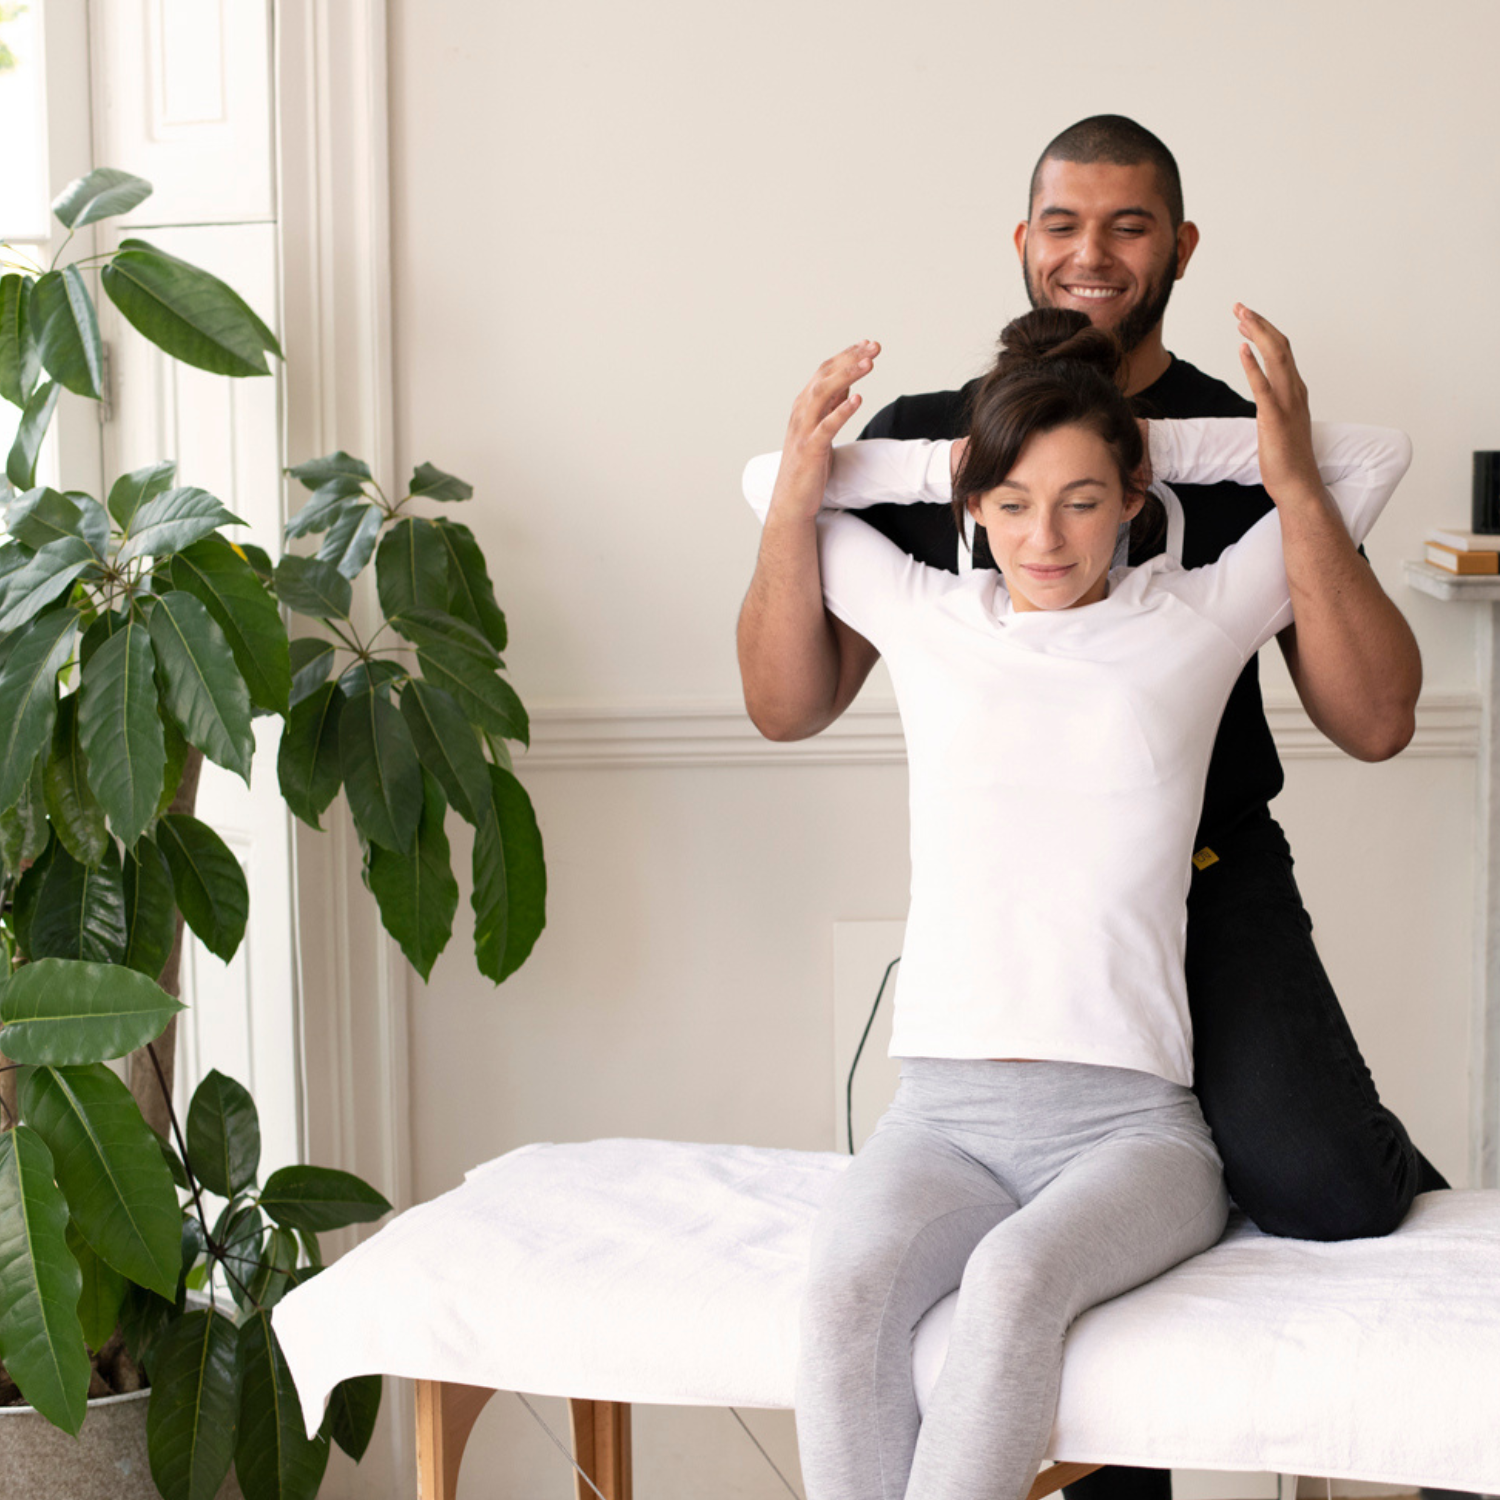 Therapist stretches client's back during an assisted stretching session at home